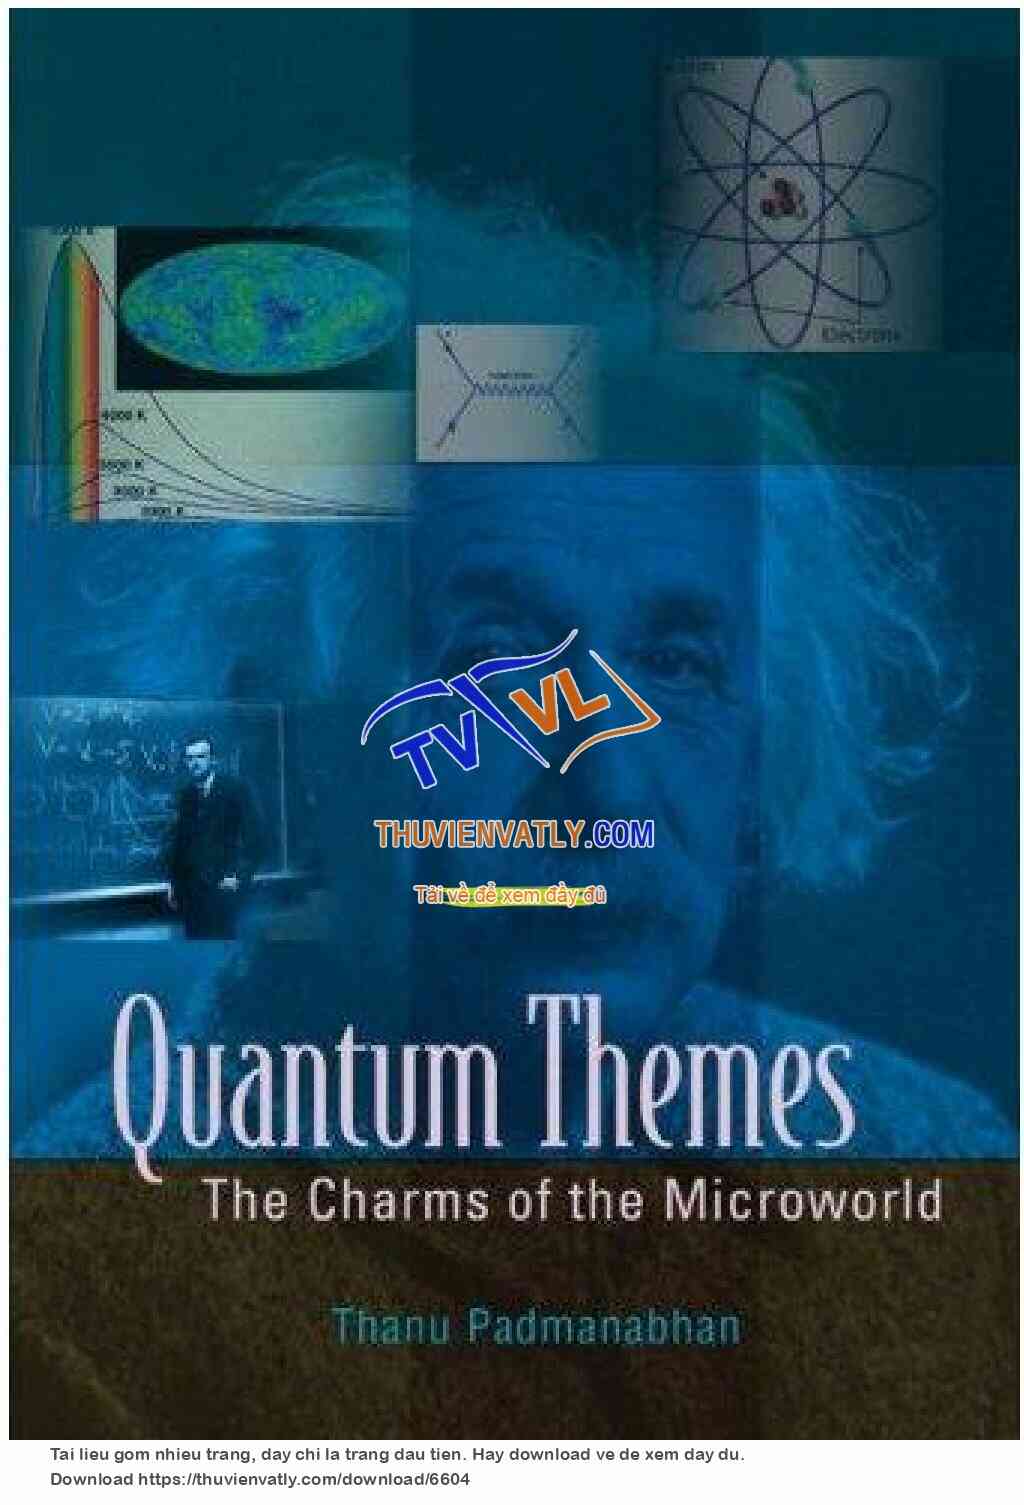 Quantum Themes - The Charms of the Microworld